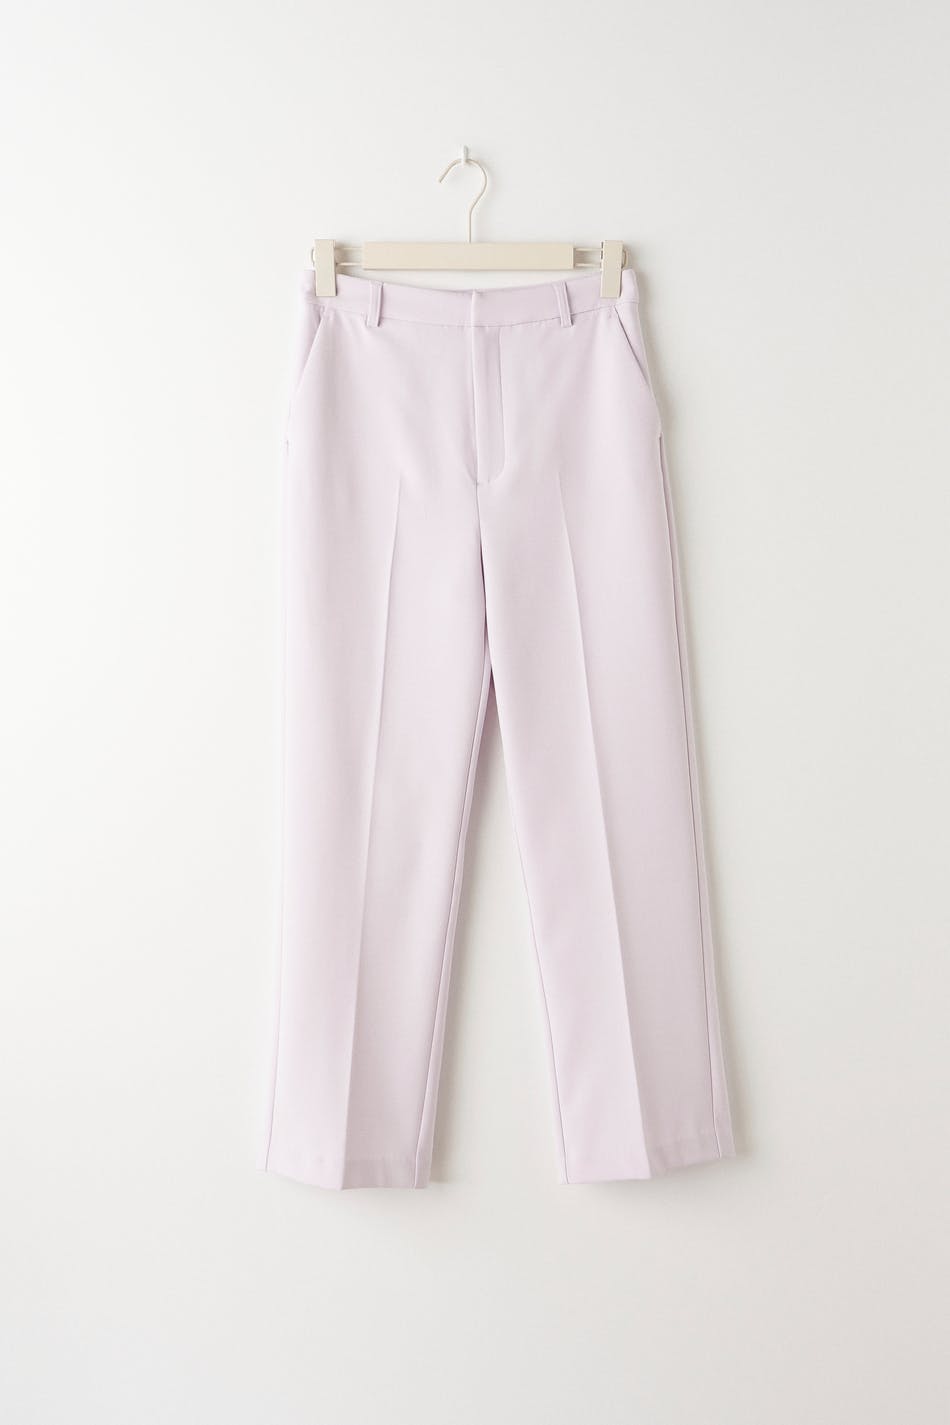 Gina Tricot Straight PETITE trousers 32  Lavender fog (4222)